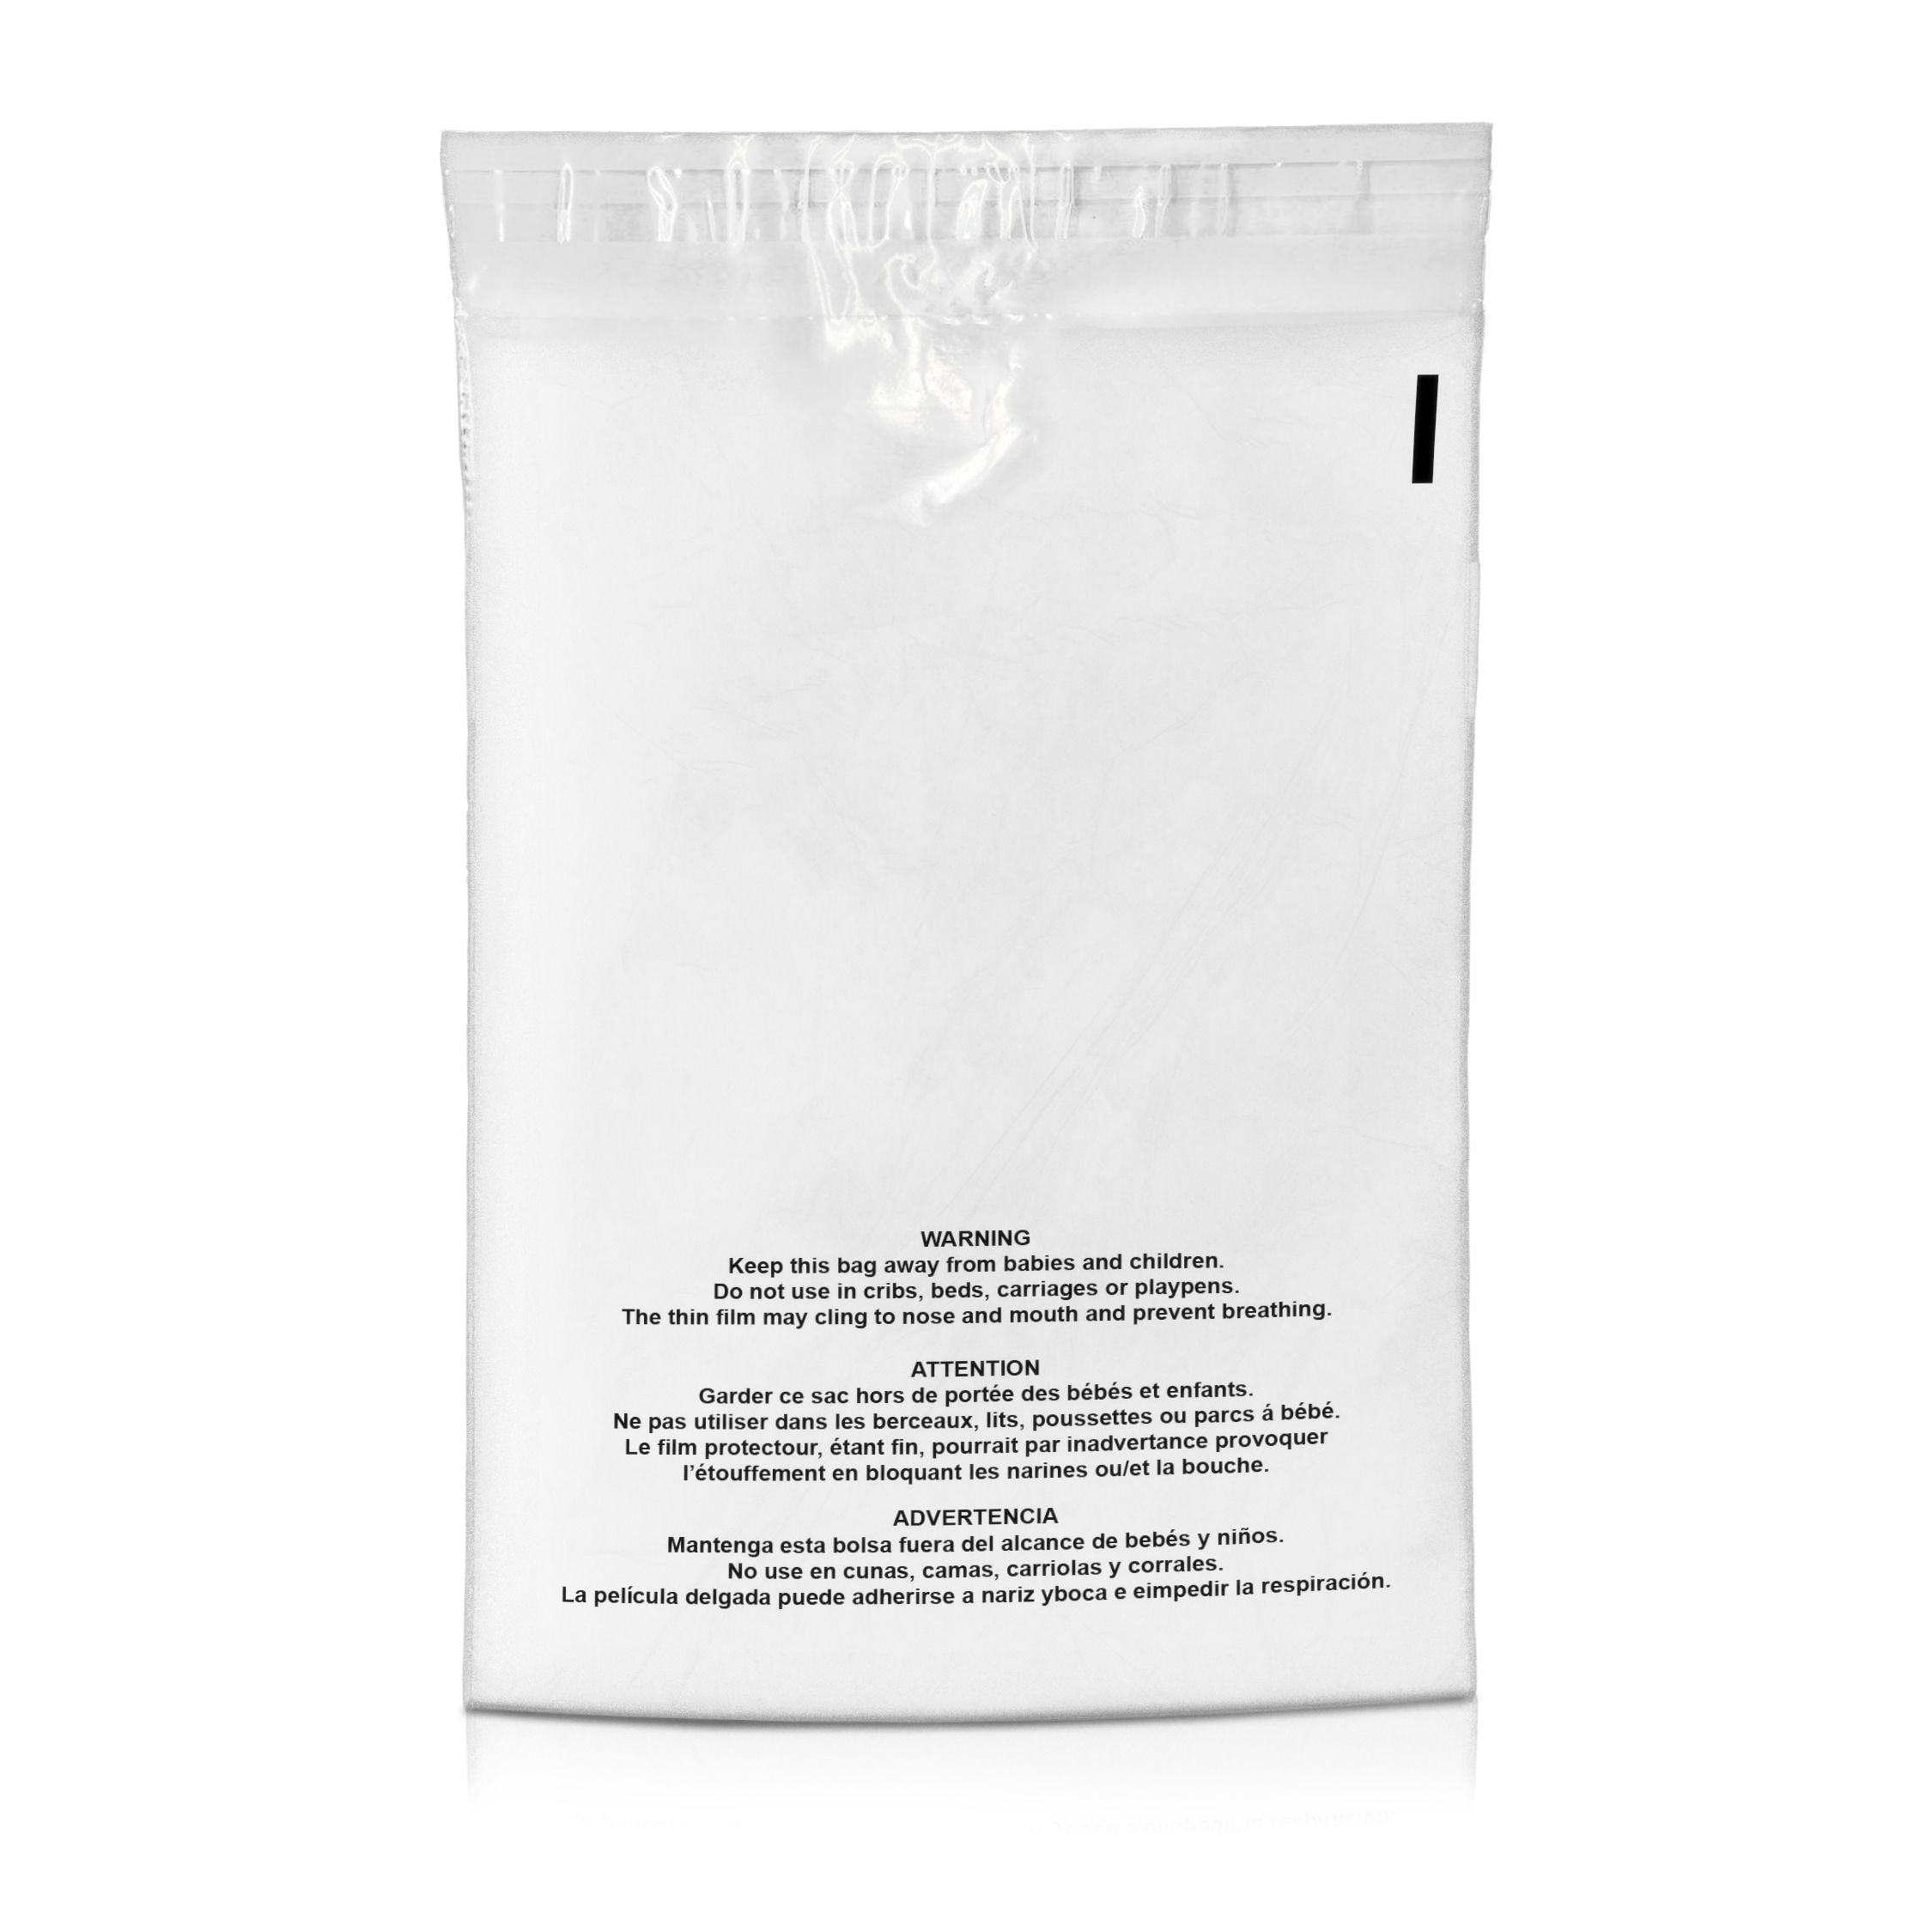 Jumbo Size Clear Peel and Seal Poly Bags with Suffocation Warning Print by Mighty Gadget 12”x18” 100 Pack 